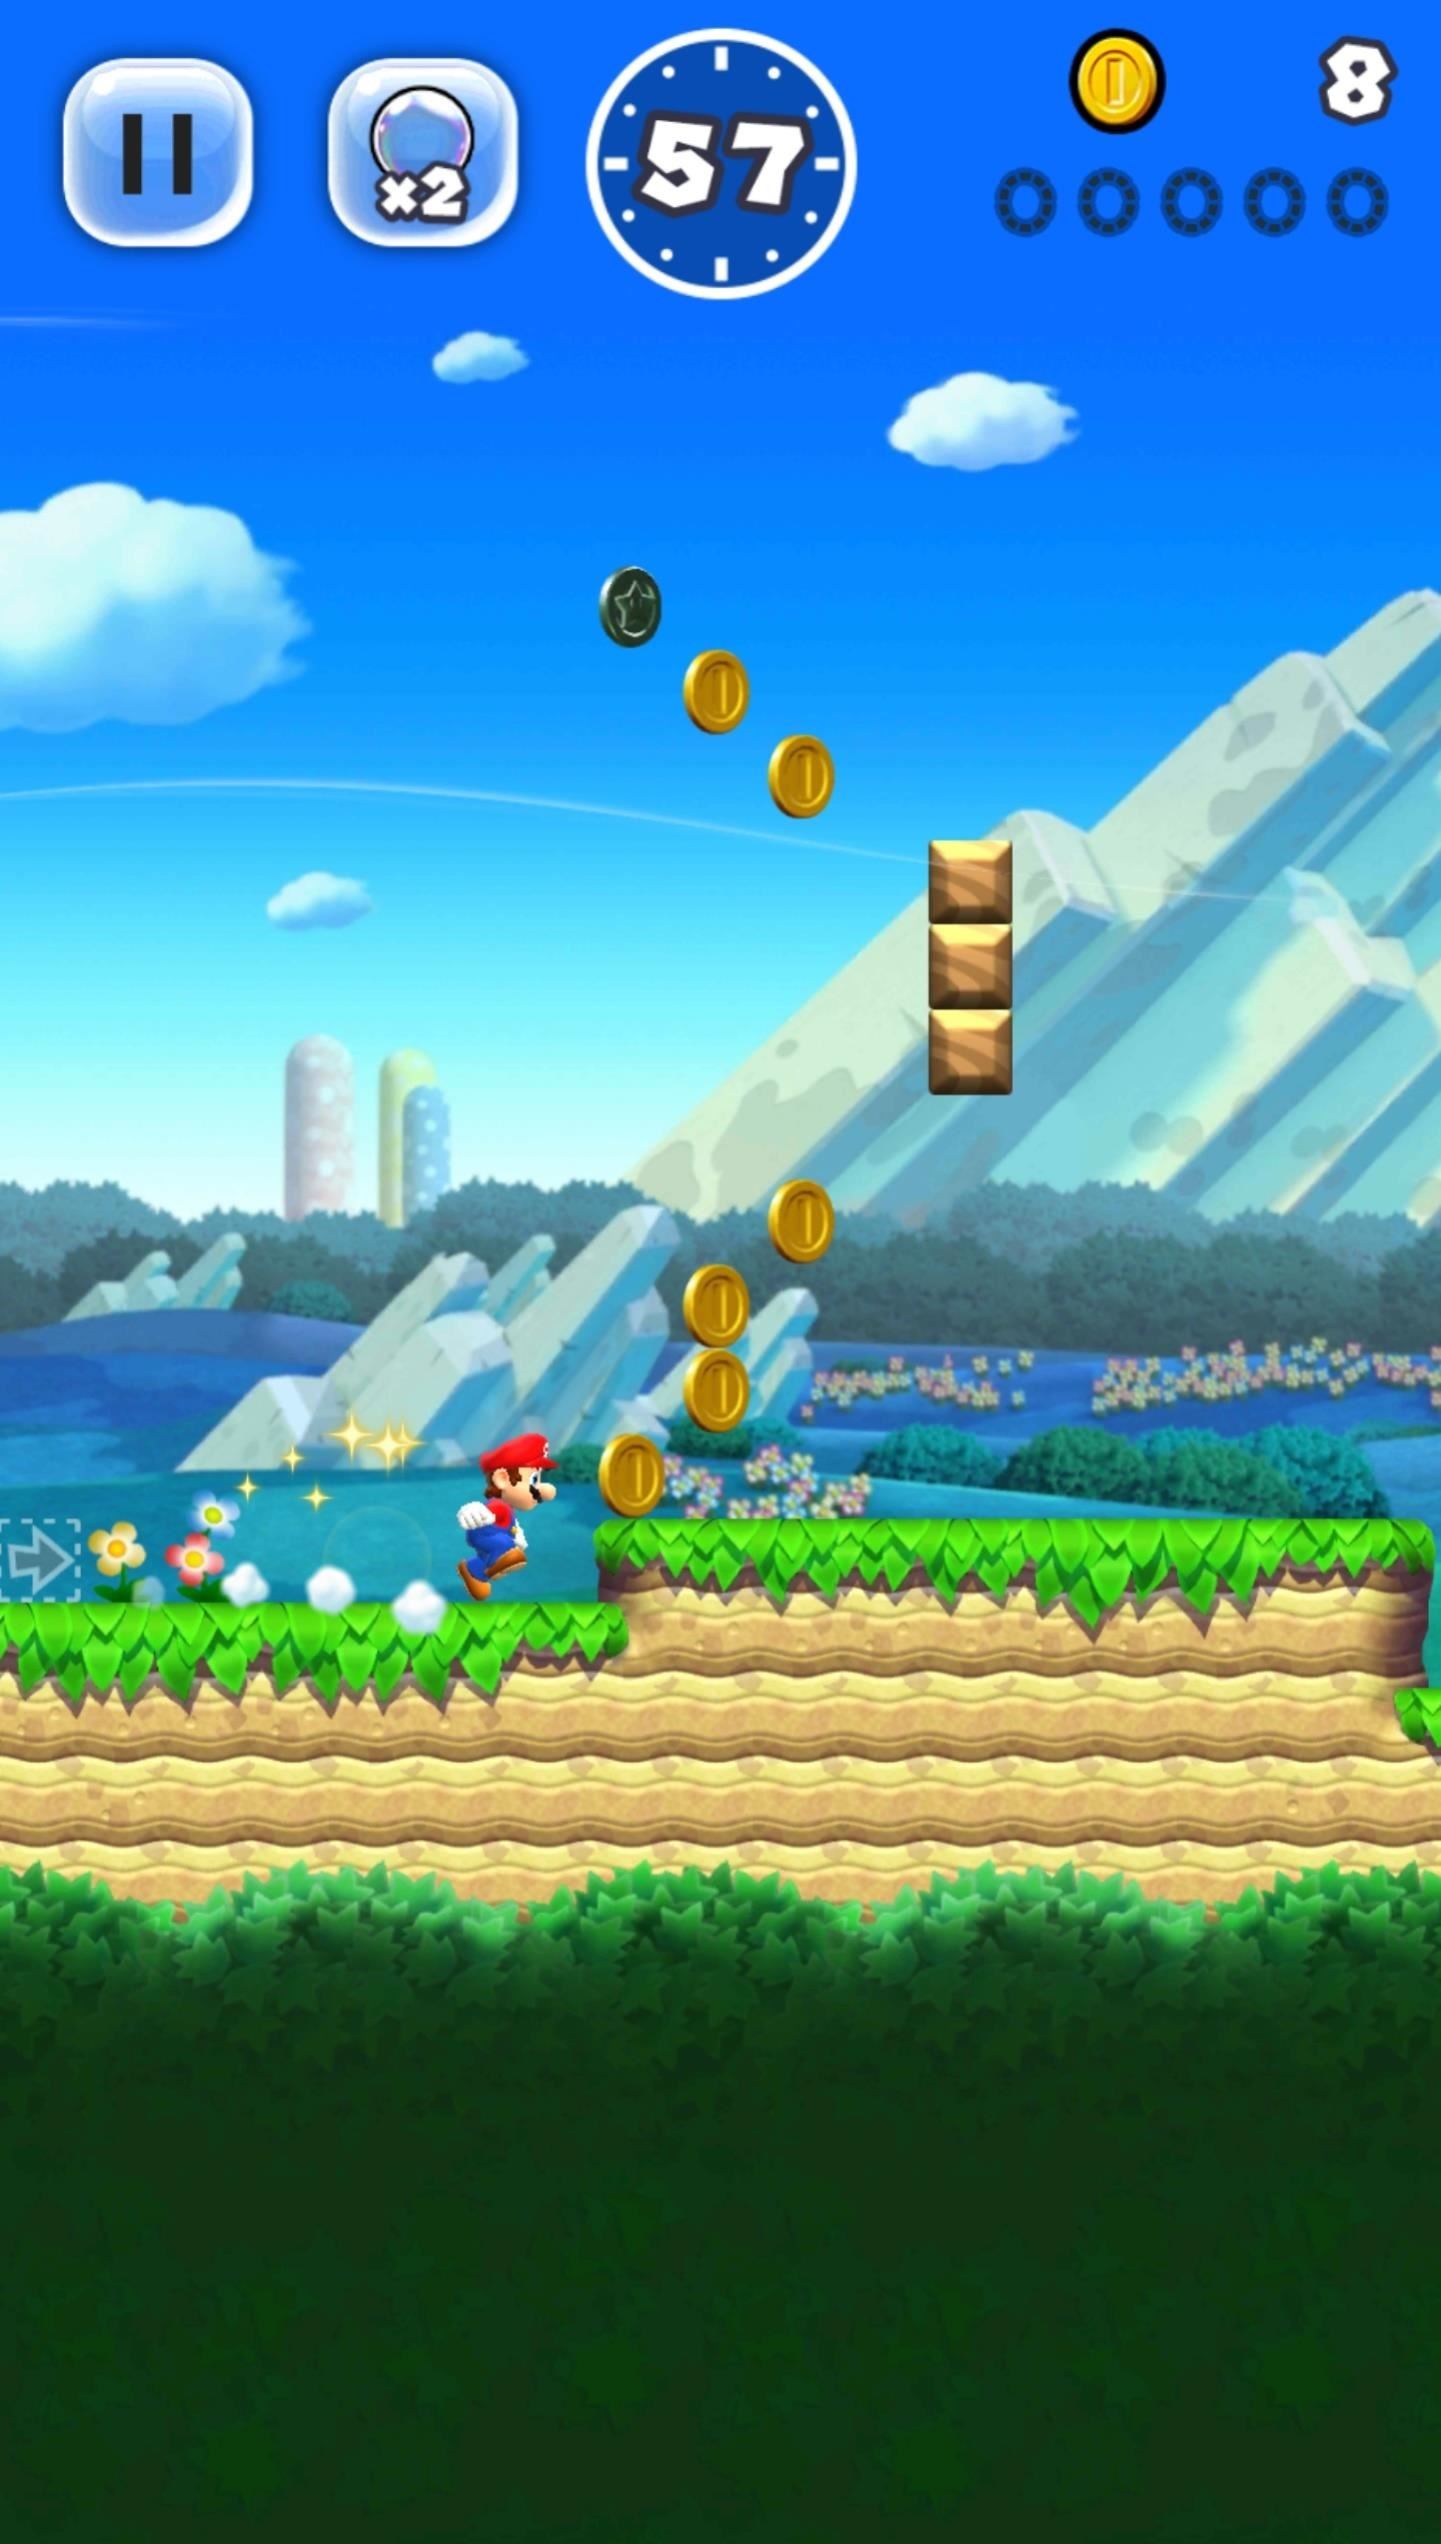 Super Mario Run 101: How to Use the Bubble at Any Time to Go Back & Collect Items